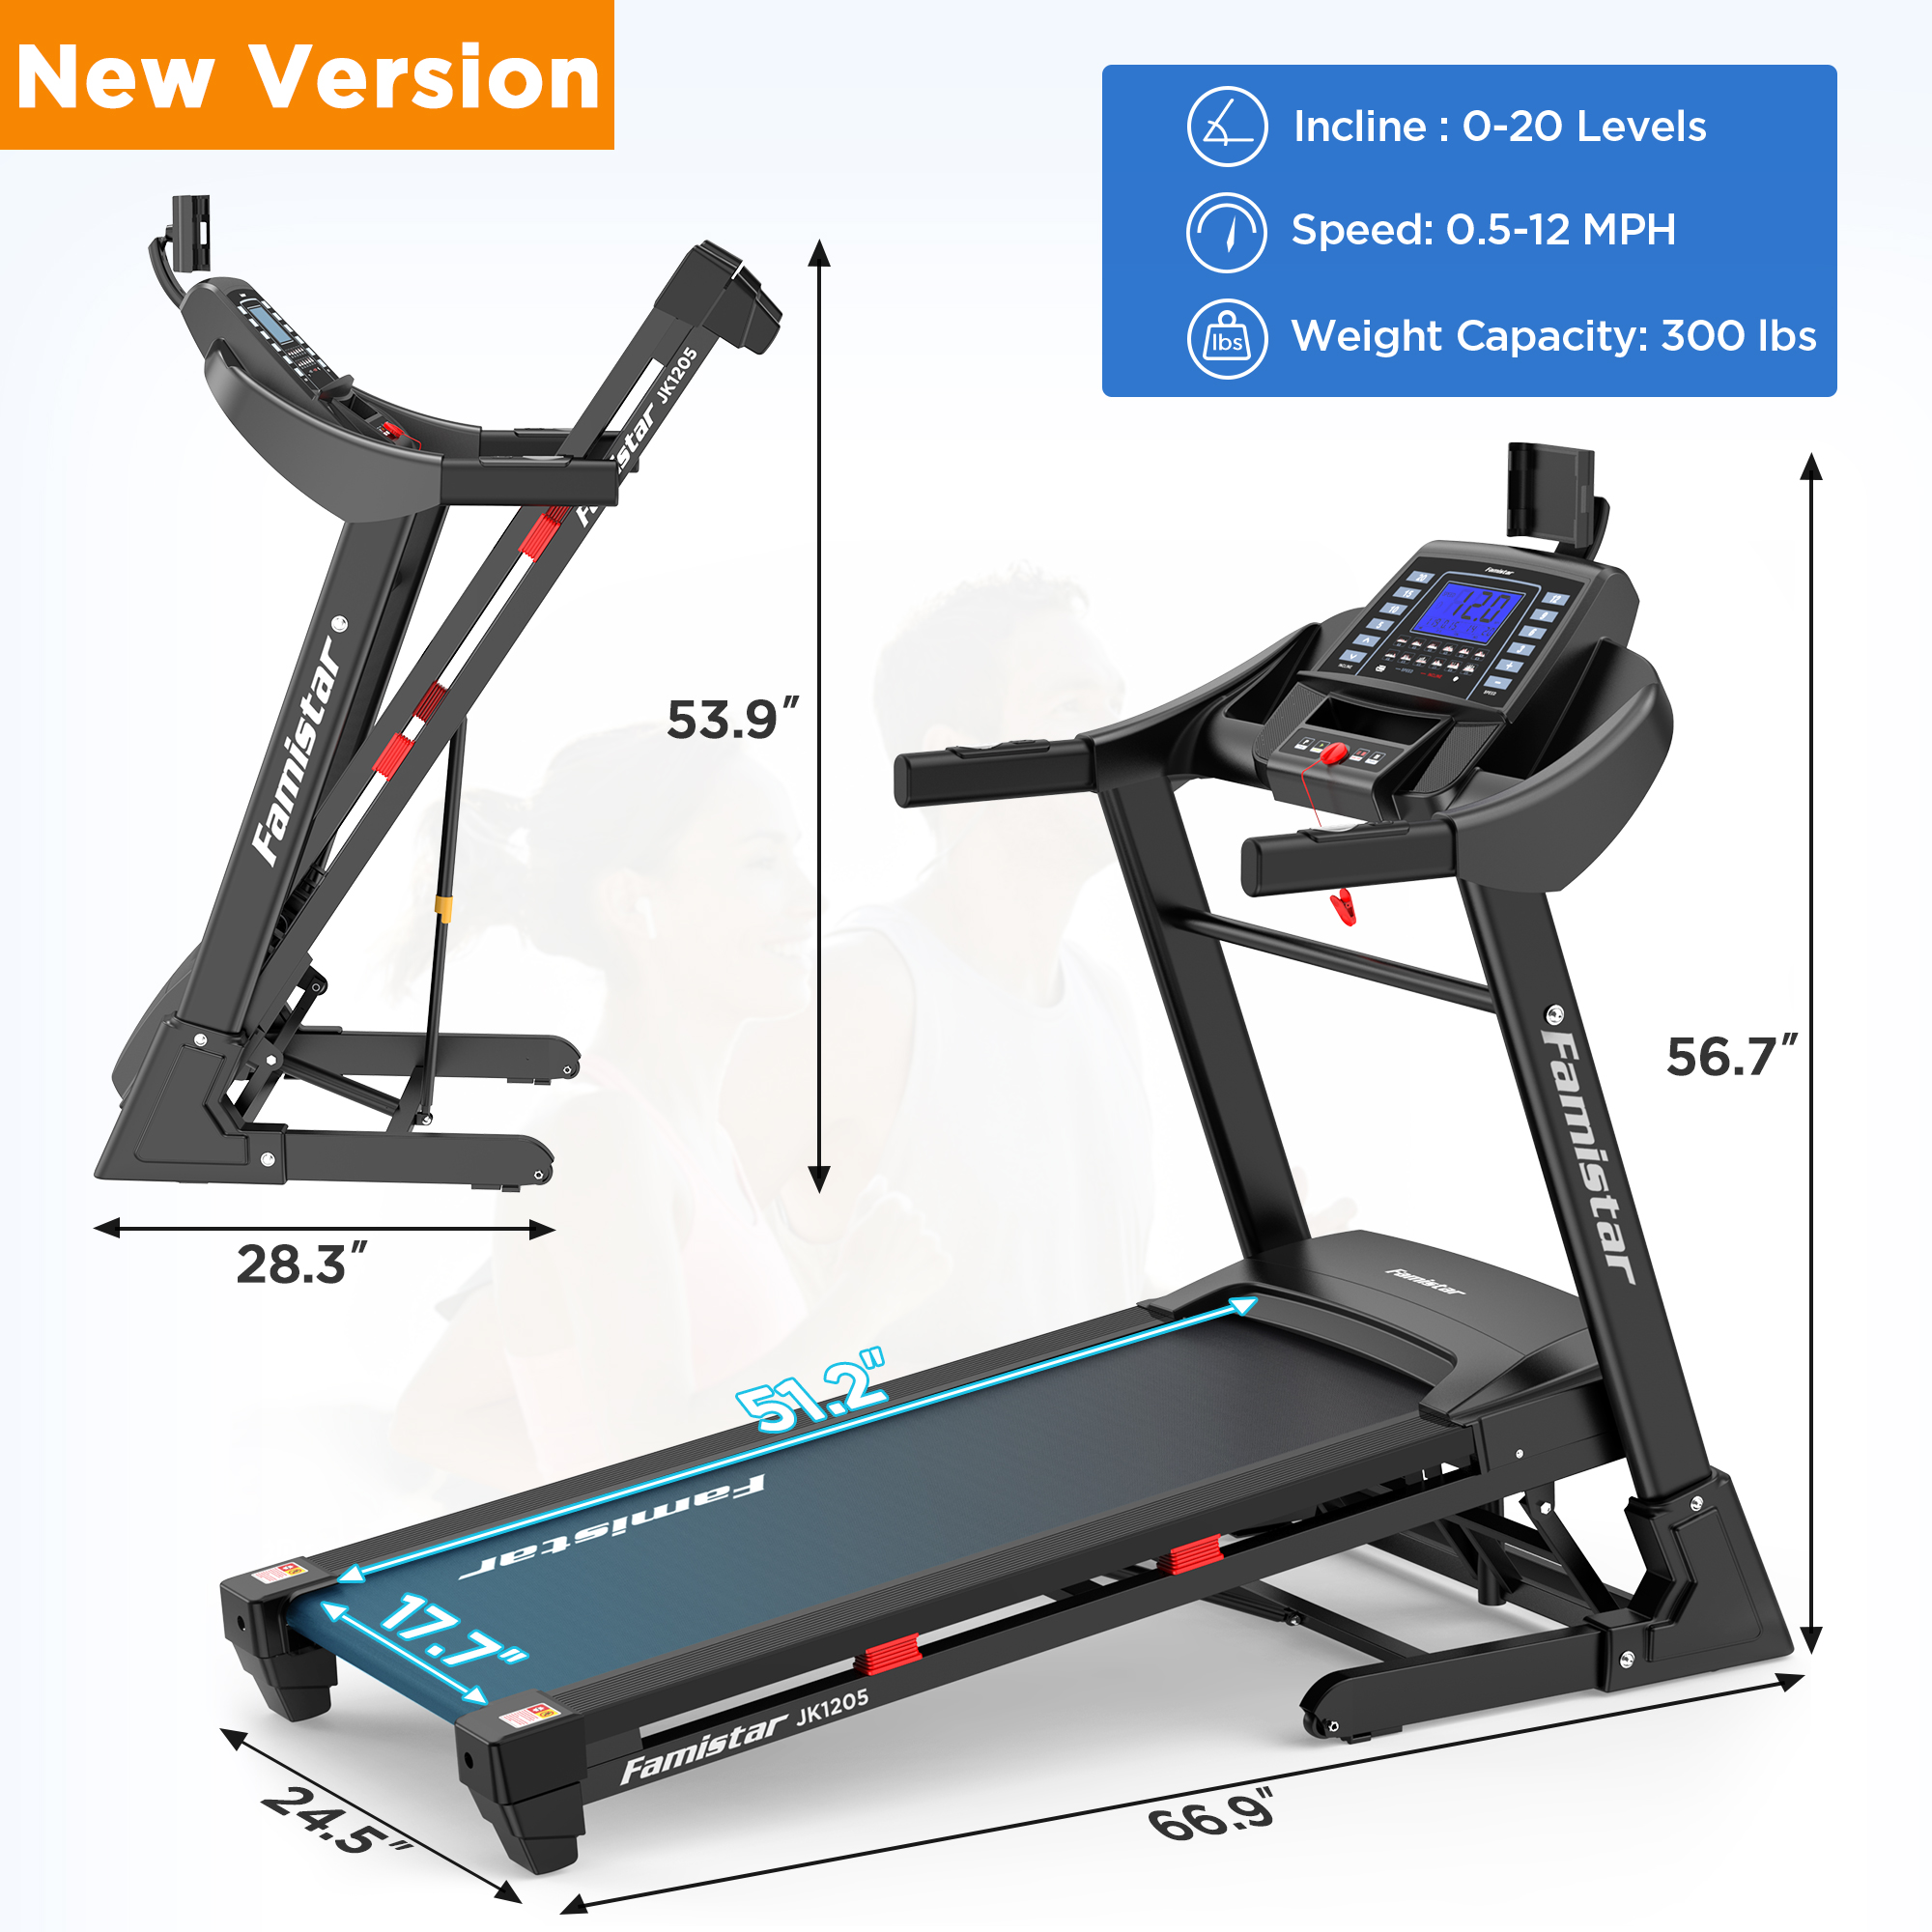 Famistar 4.0HP Folding Treadmill for Home with 20 Levels Auto Incline, 300LB Capacity, 12MPH Speed Controls, New Version, Black - image 3 of 8